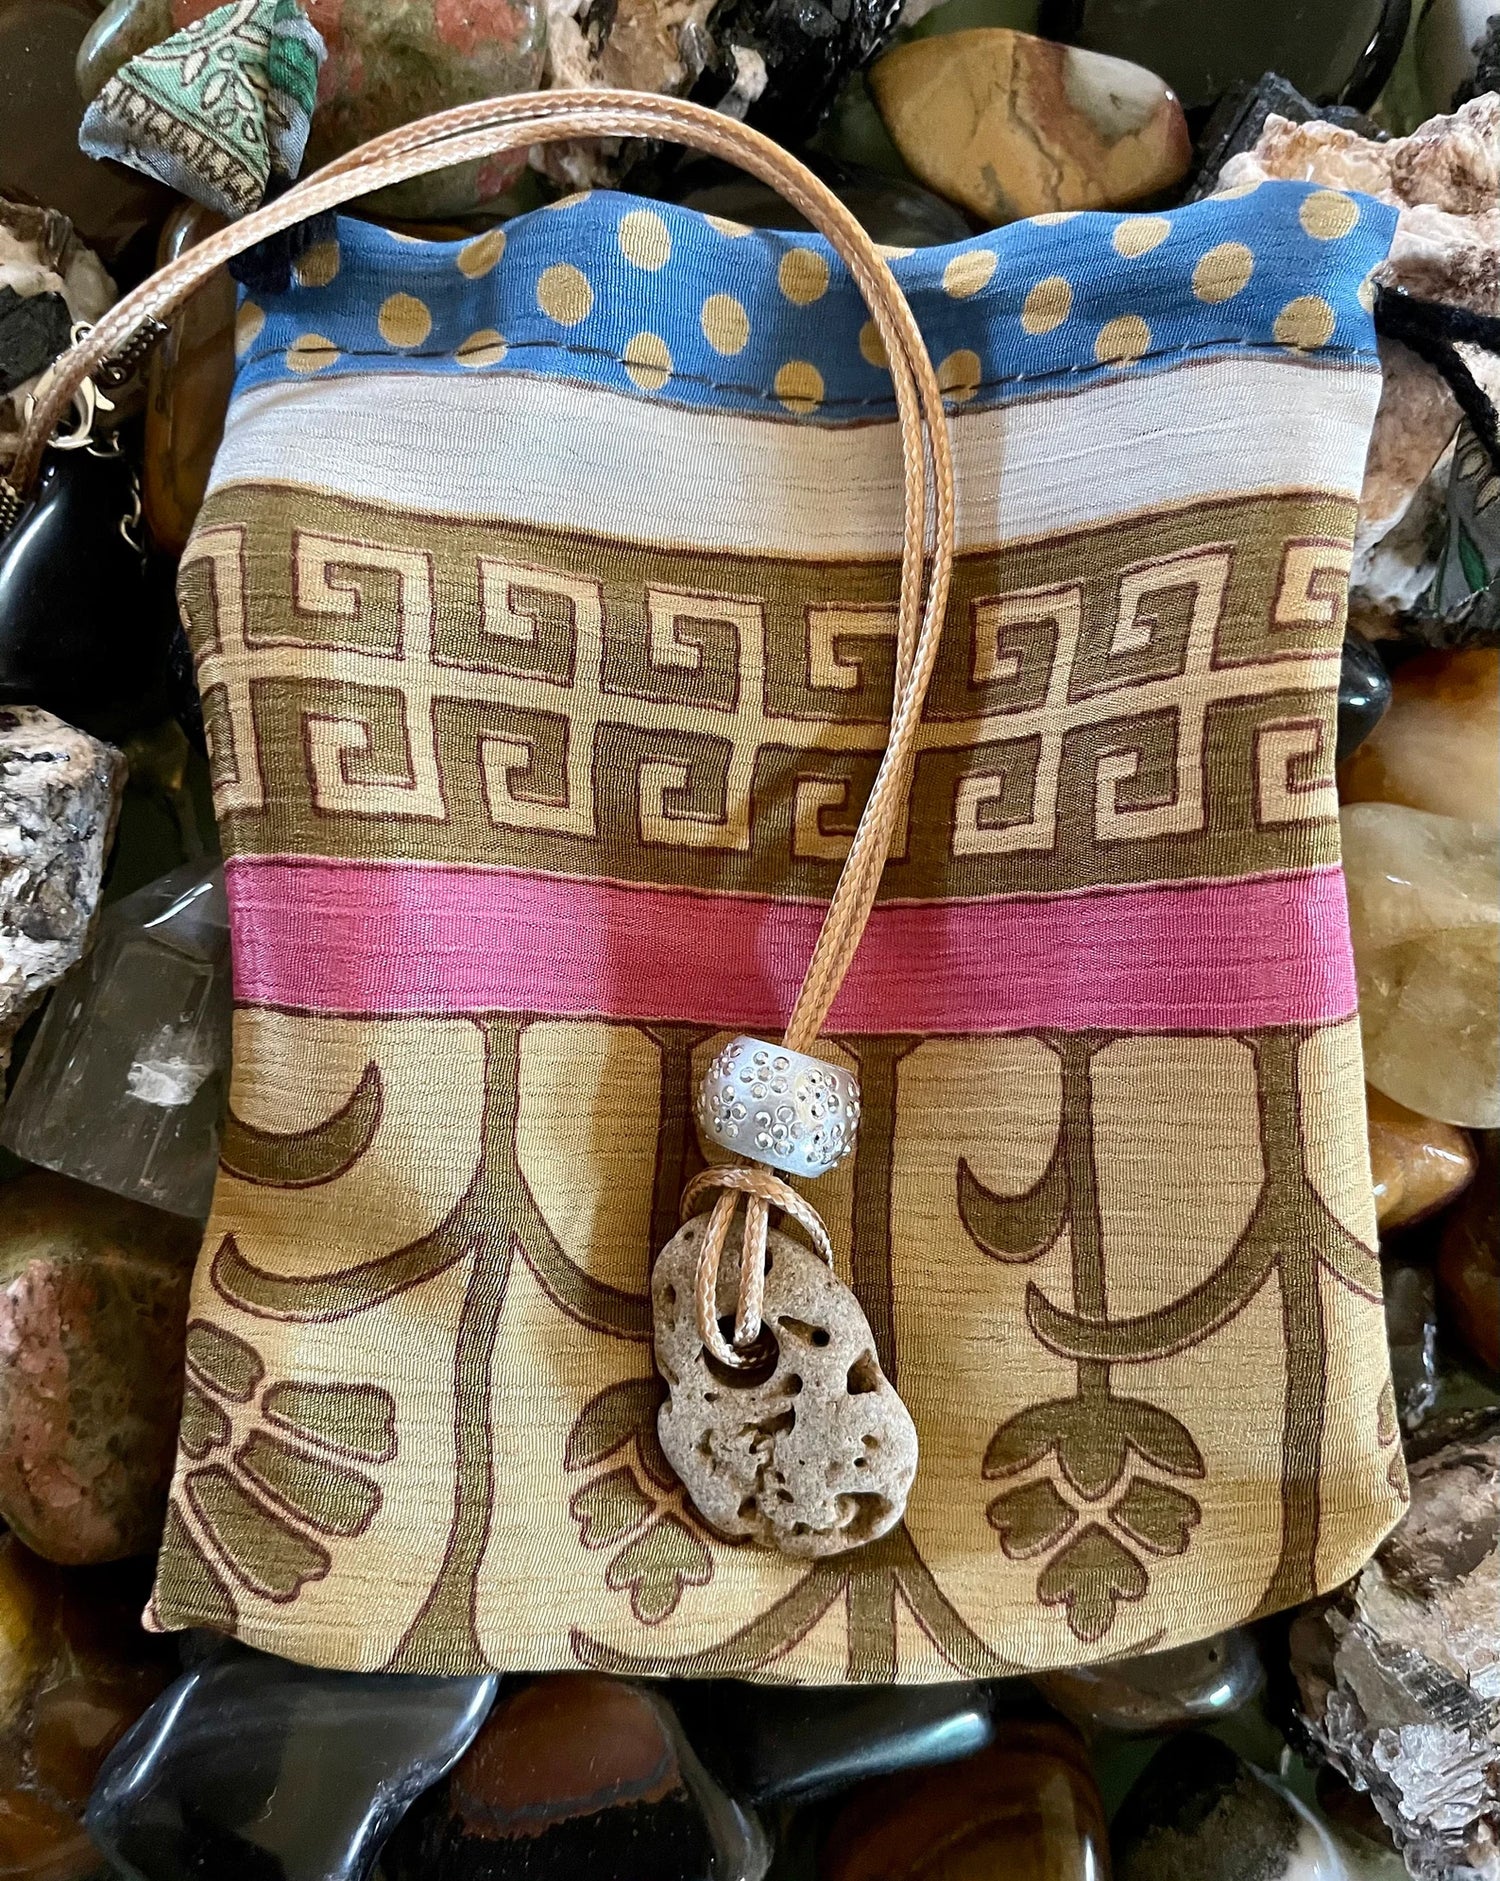 Spirited Bohemian Water Magic Amulet with Hand Crafted Silk Pouch, Bodhi Jewelry, Bodhi Leaf Market, hag stone, odin stone, hex stone, wishing stone, fairy stone, island stone, beach stone, stone necklace, stone gift